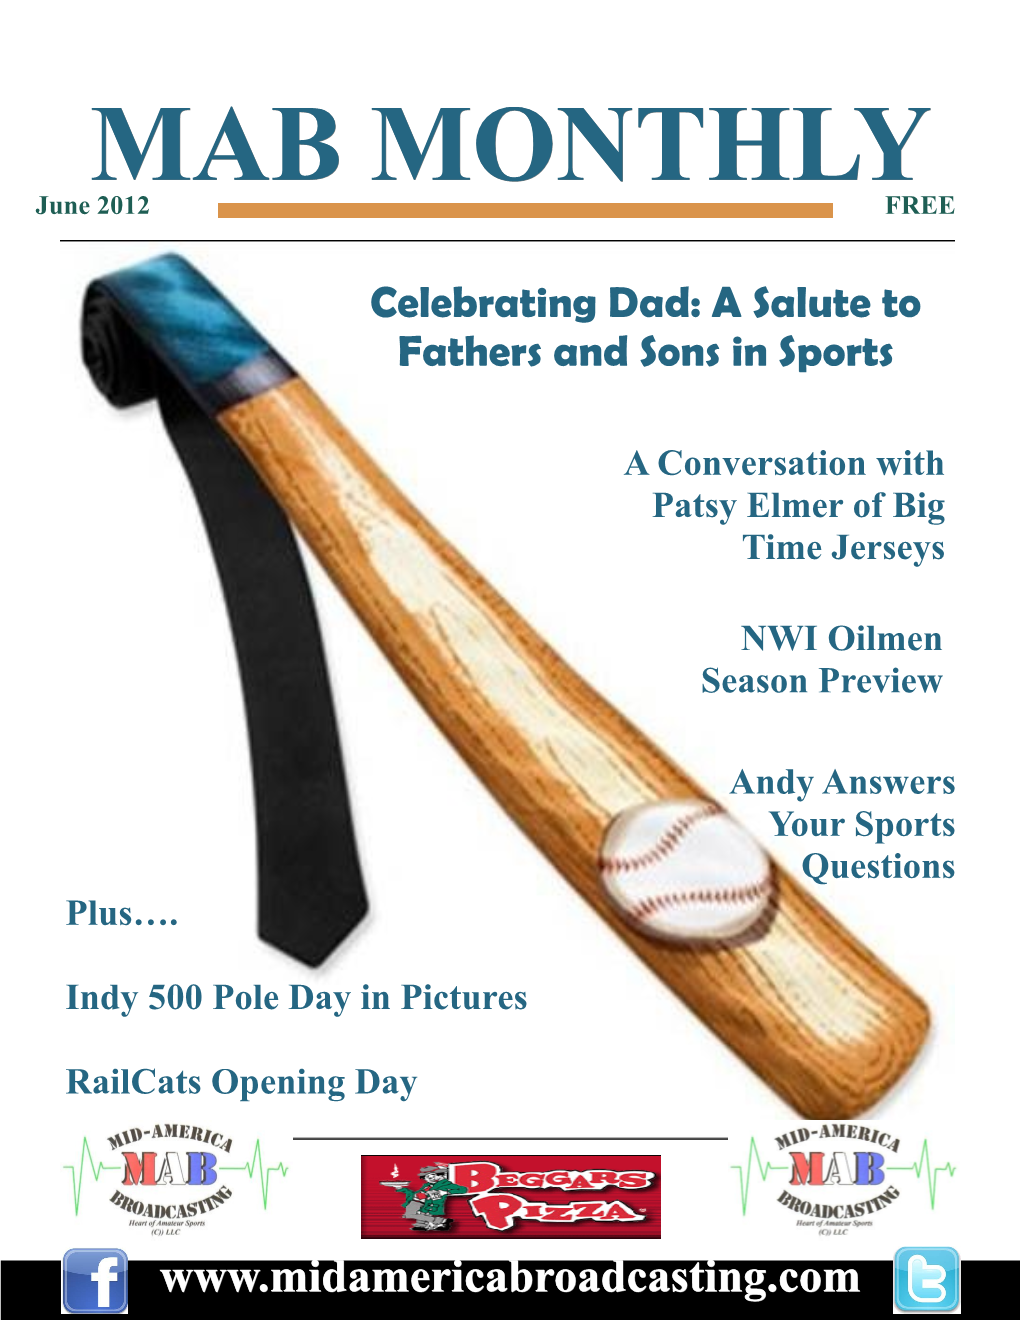 MAB MONTHLY June 2012 FREE